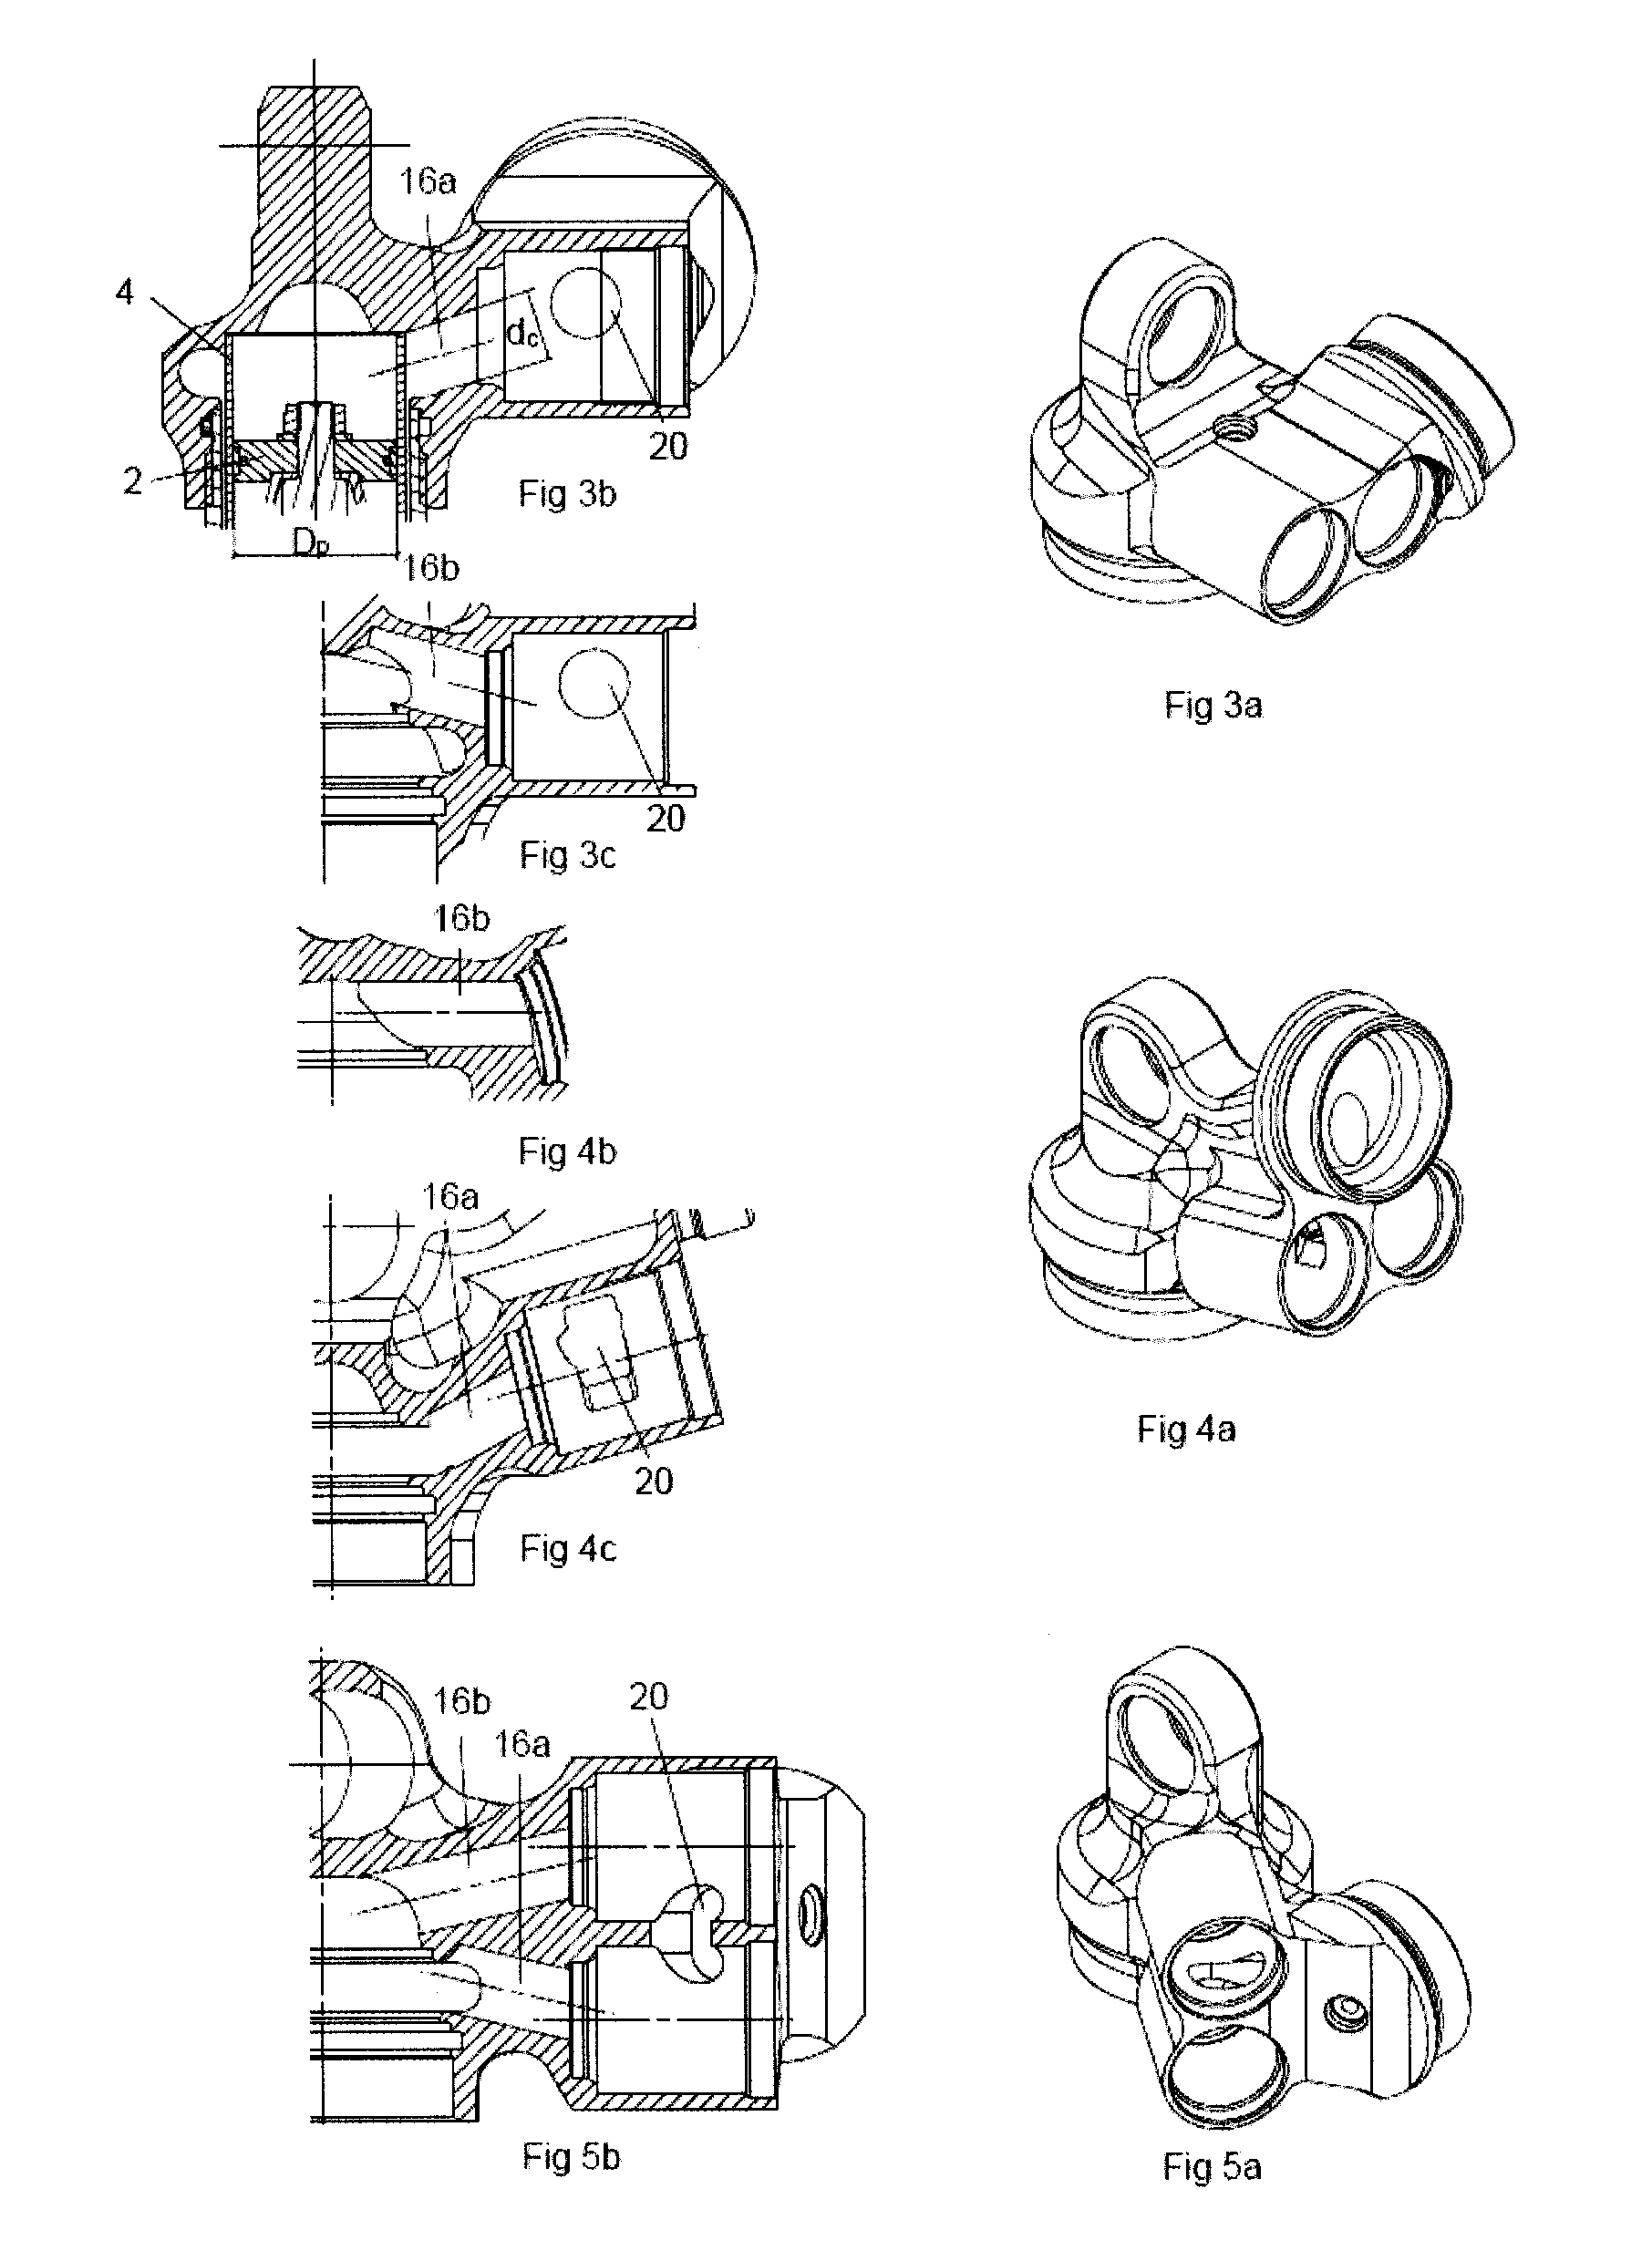 Shock absorber with hydraulic flow ducts